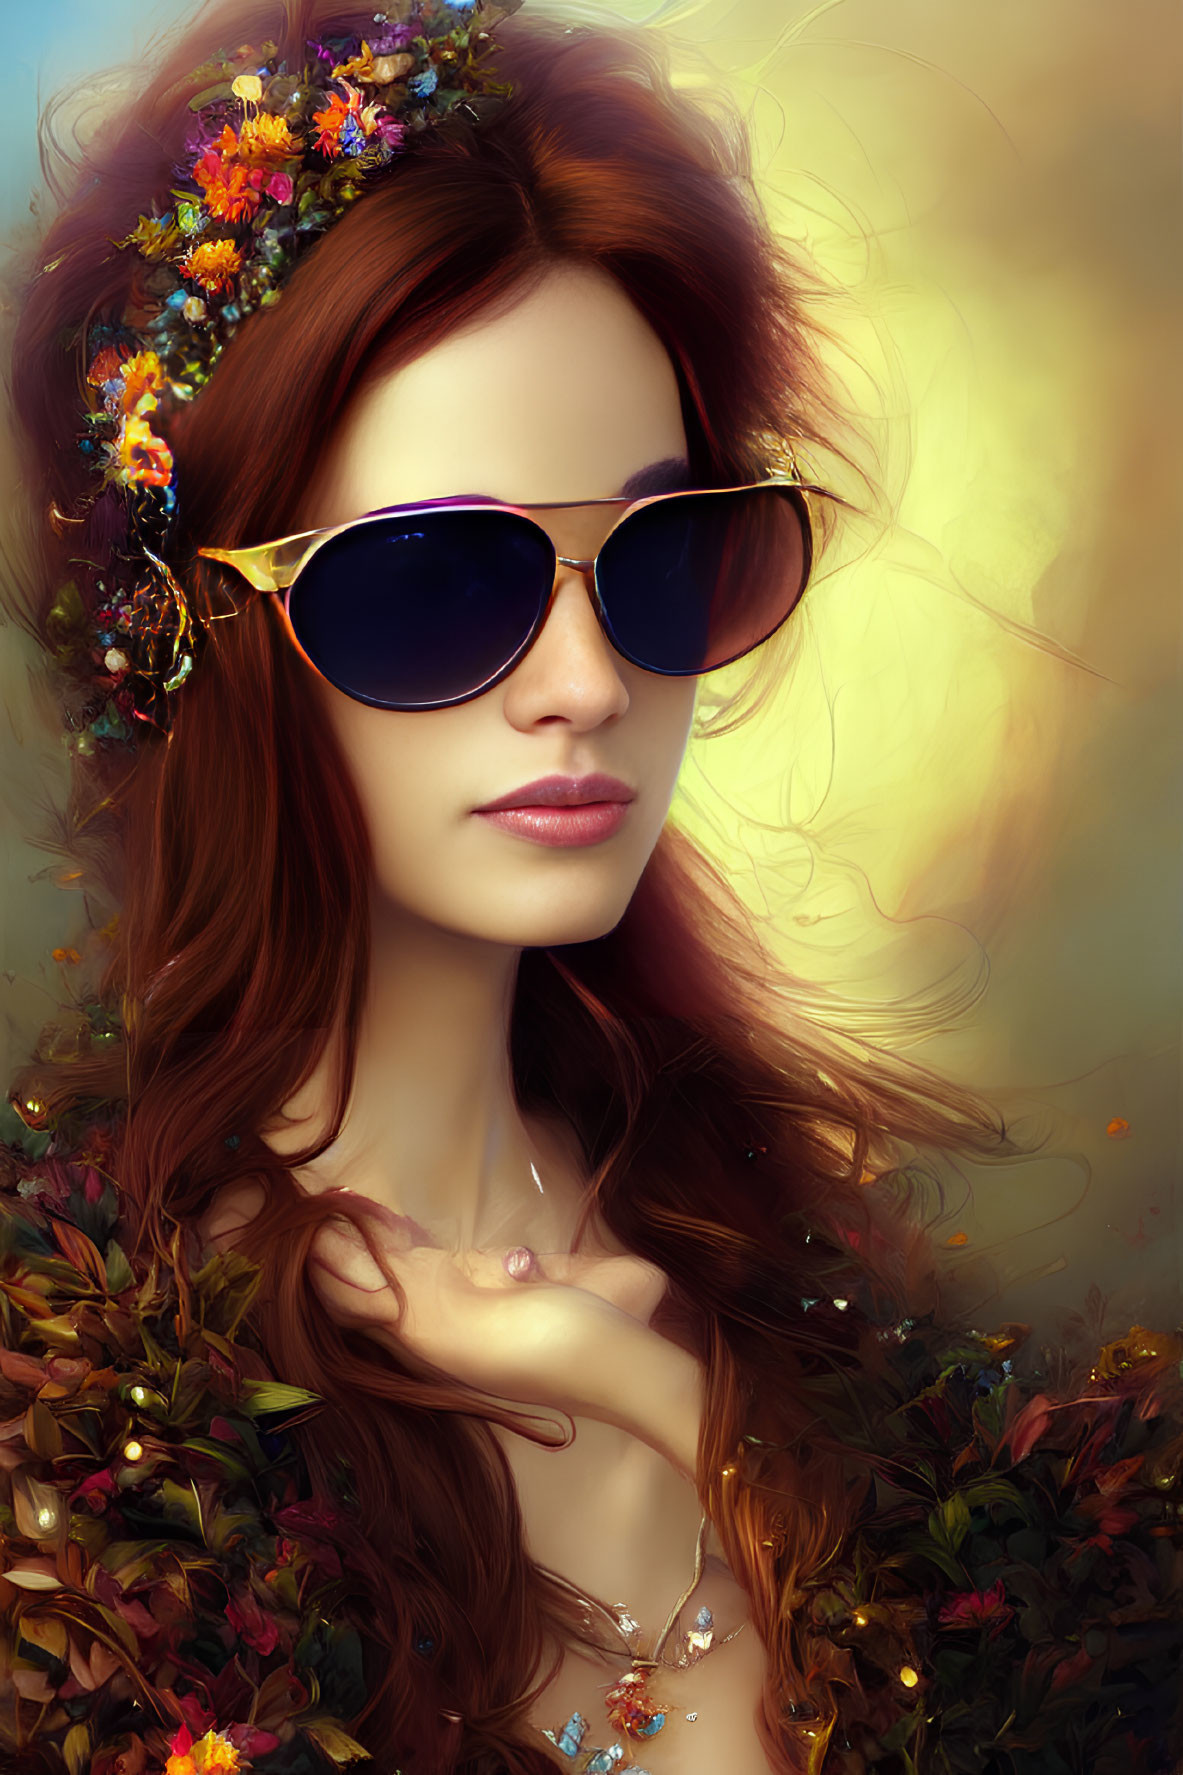 Woman with Long Red Hair and Flowers in Round Sunglasses Against Autumn Floral Background